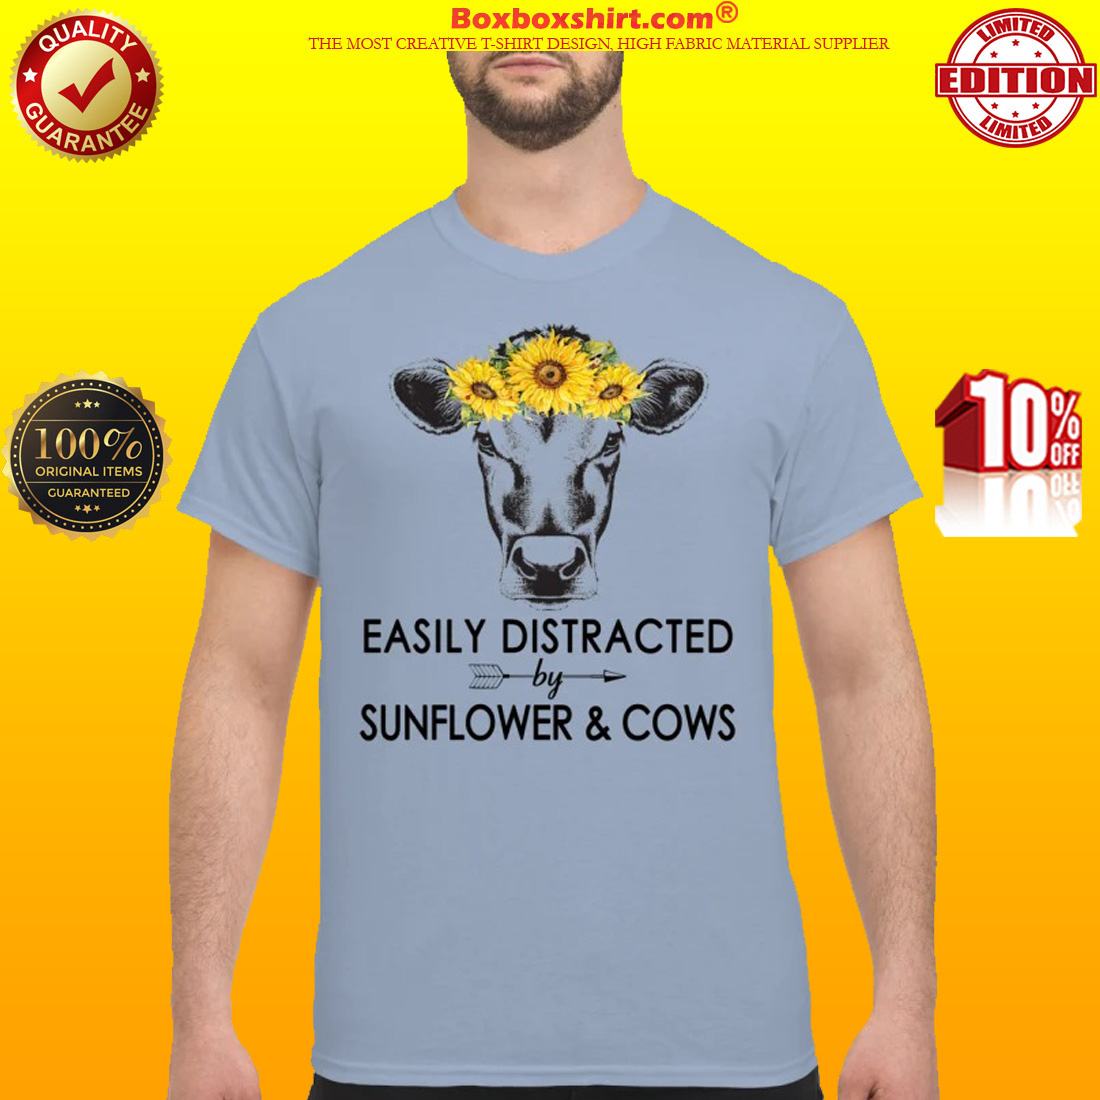 Easily distracted by sunflower and cows classic shirt